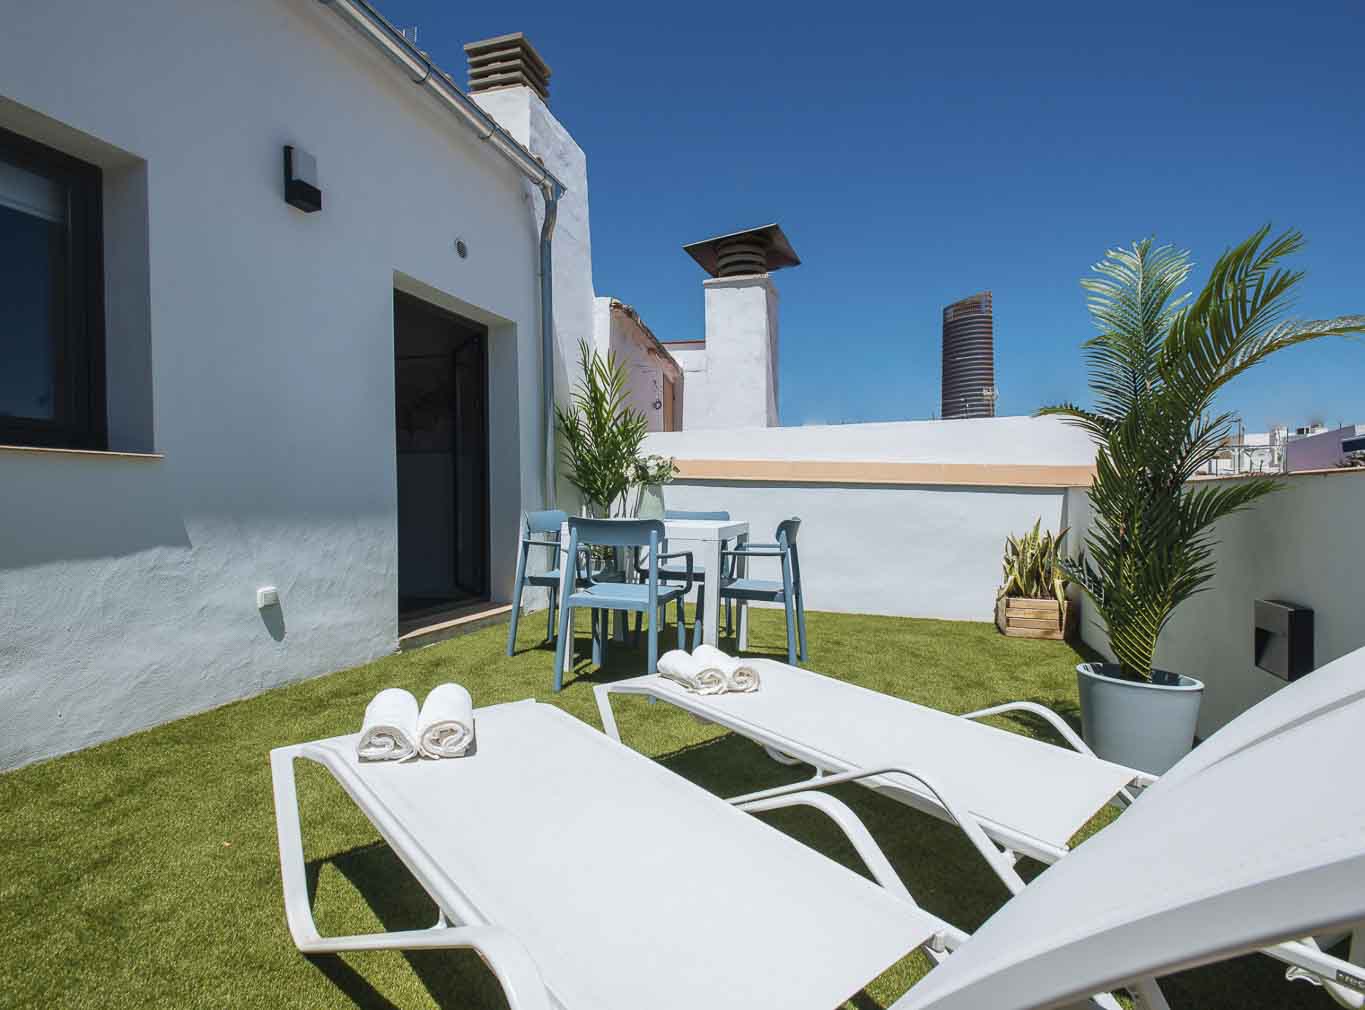 Tourist apartments with terrace in Seville